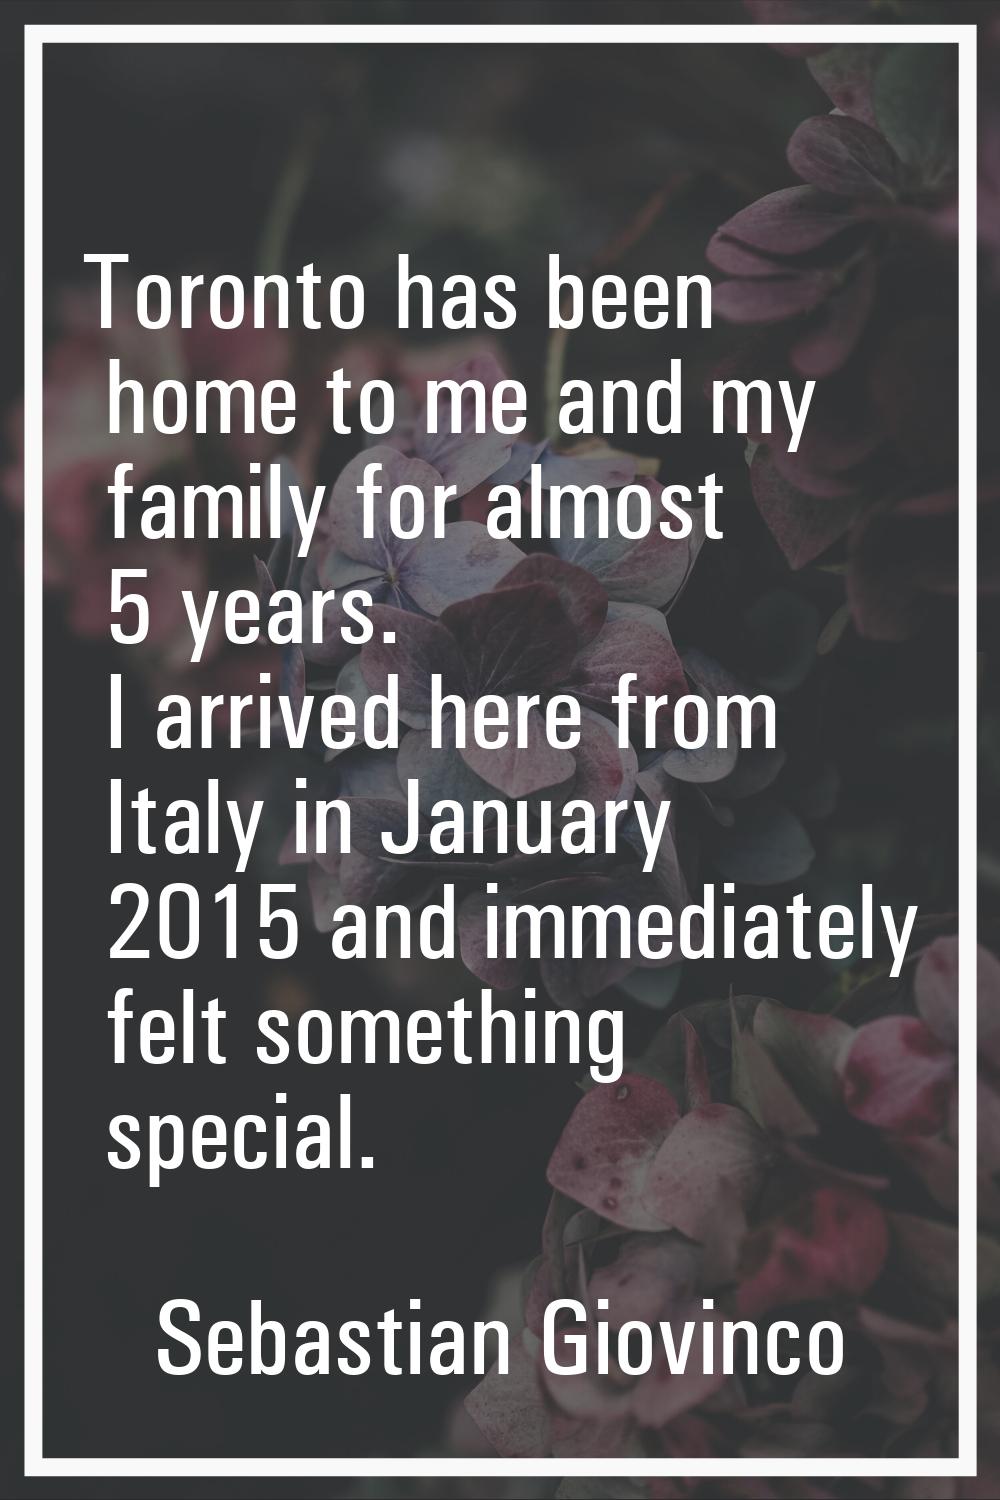 Toronto has been home to me and my family for almost 5 years. I arrived here from Italy in January 